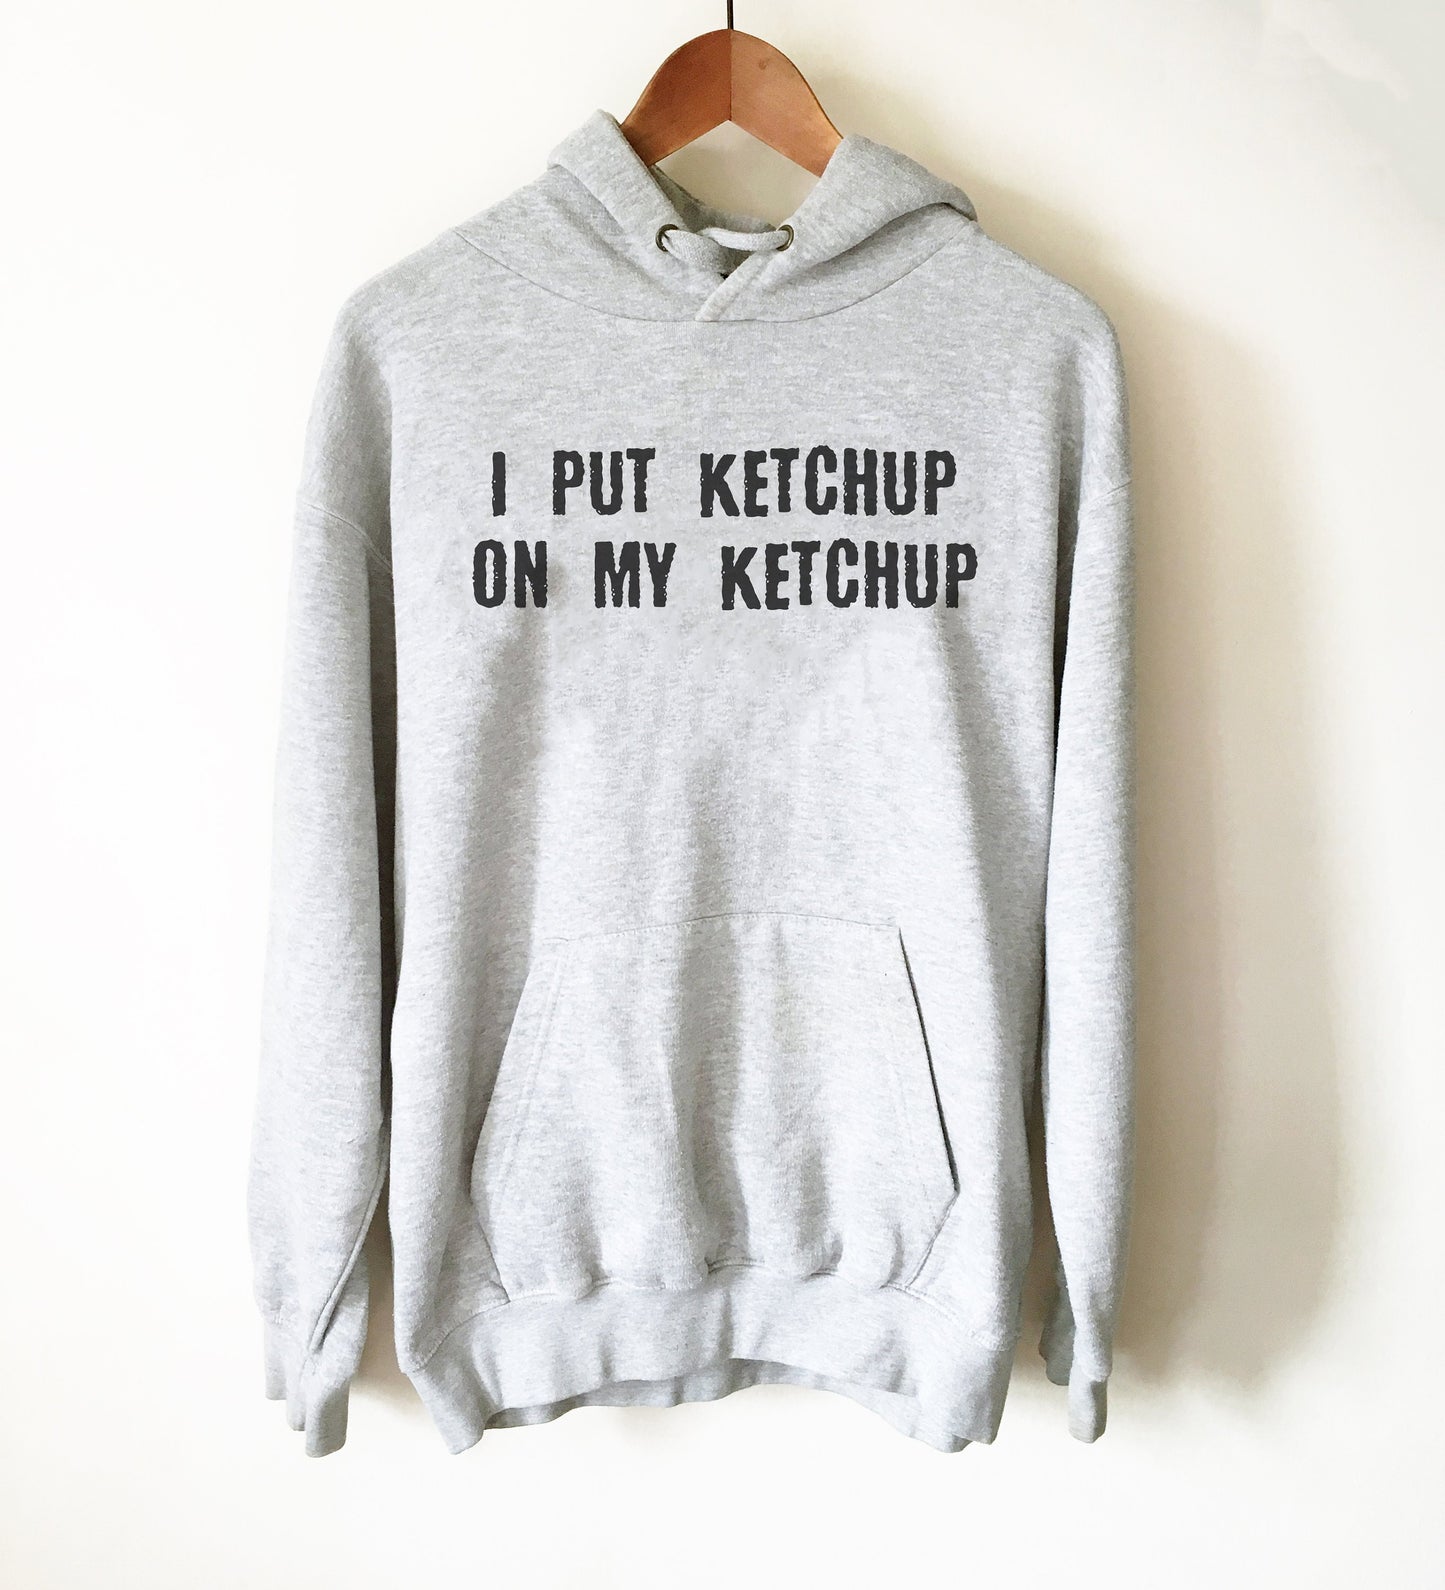 Ketchup Lovers Hoodie- I Heart Ketchup T-Shirt, I Put Ketchup On My Ketchup, French Fries Shirt, College Student Gift, Gift For Ketchup Fan